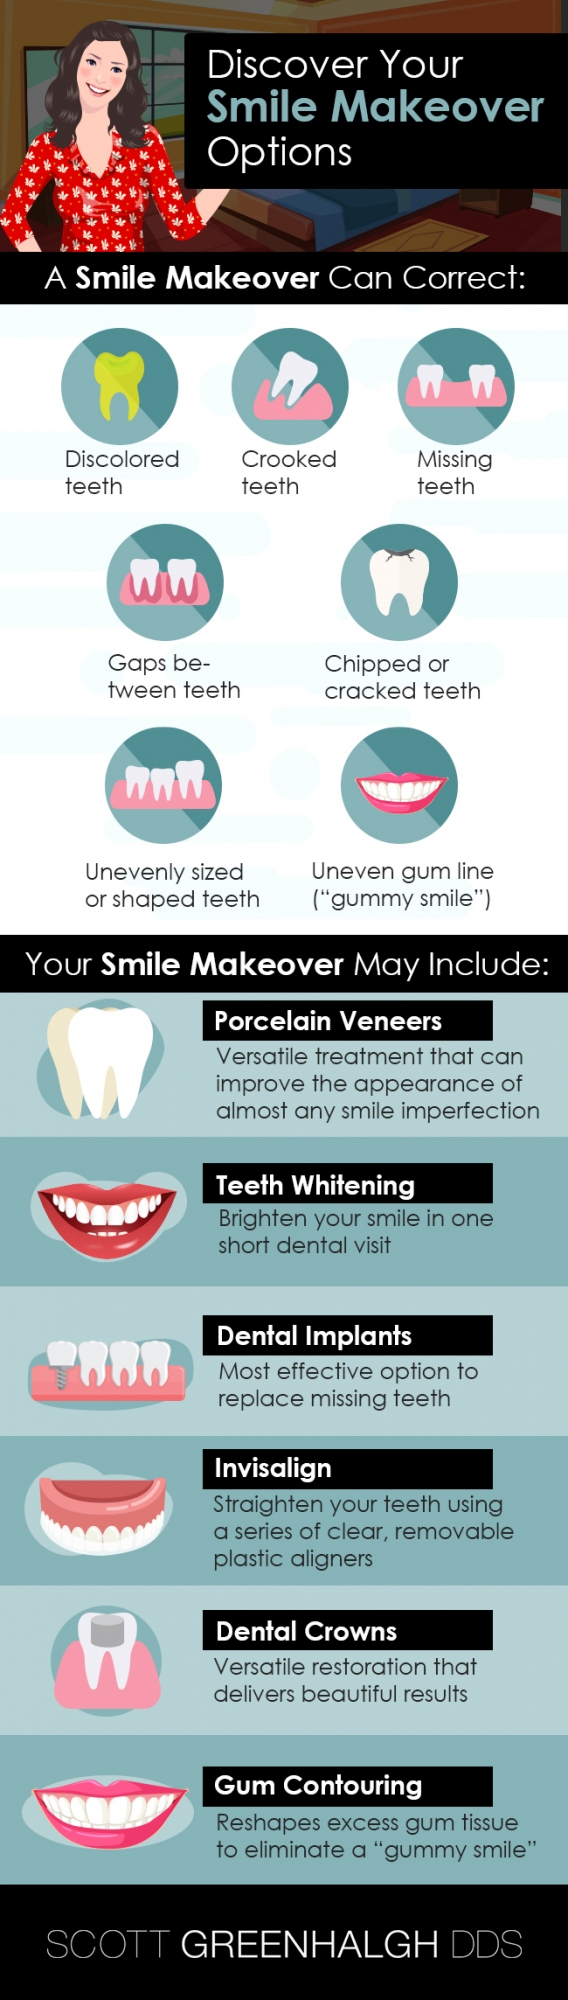 smile makeover infographic - Lakewood cosmetic dentist